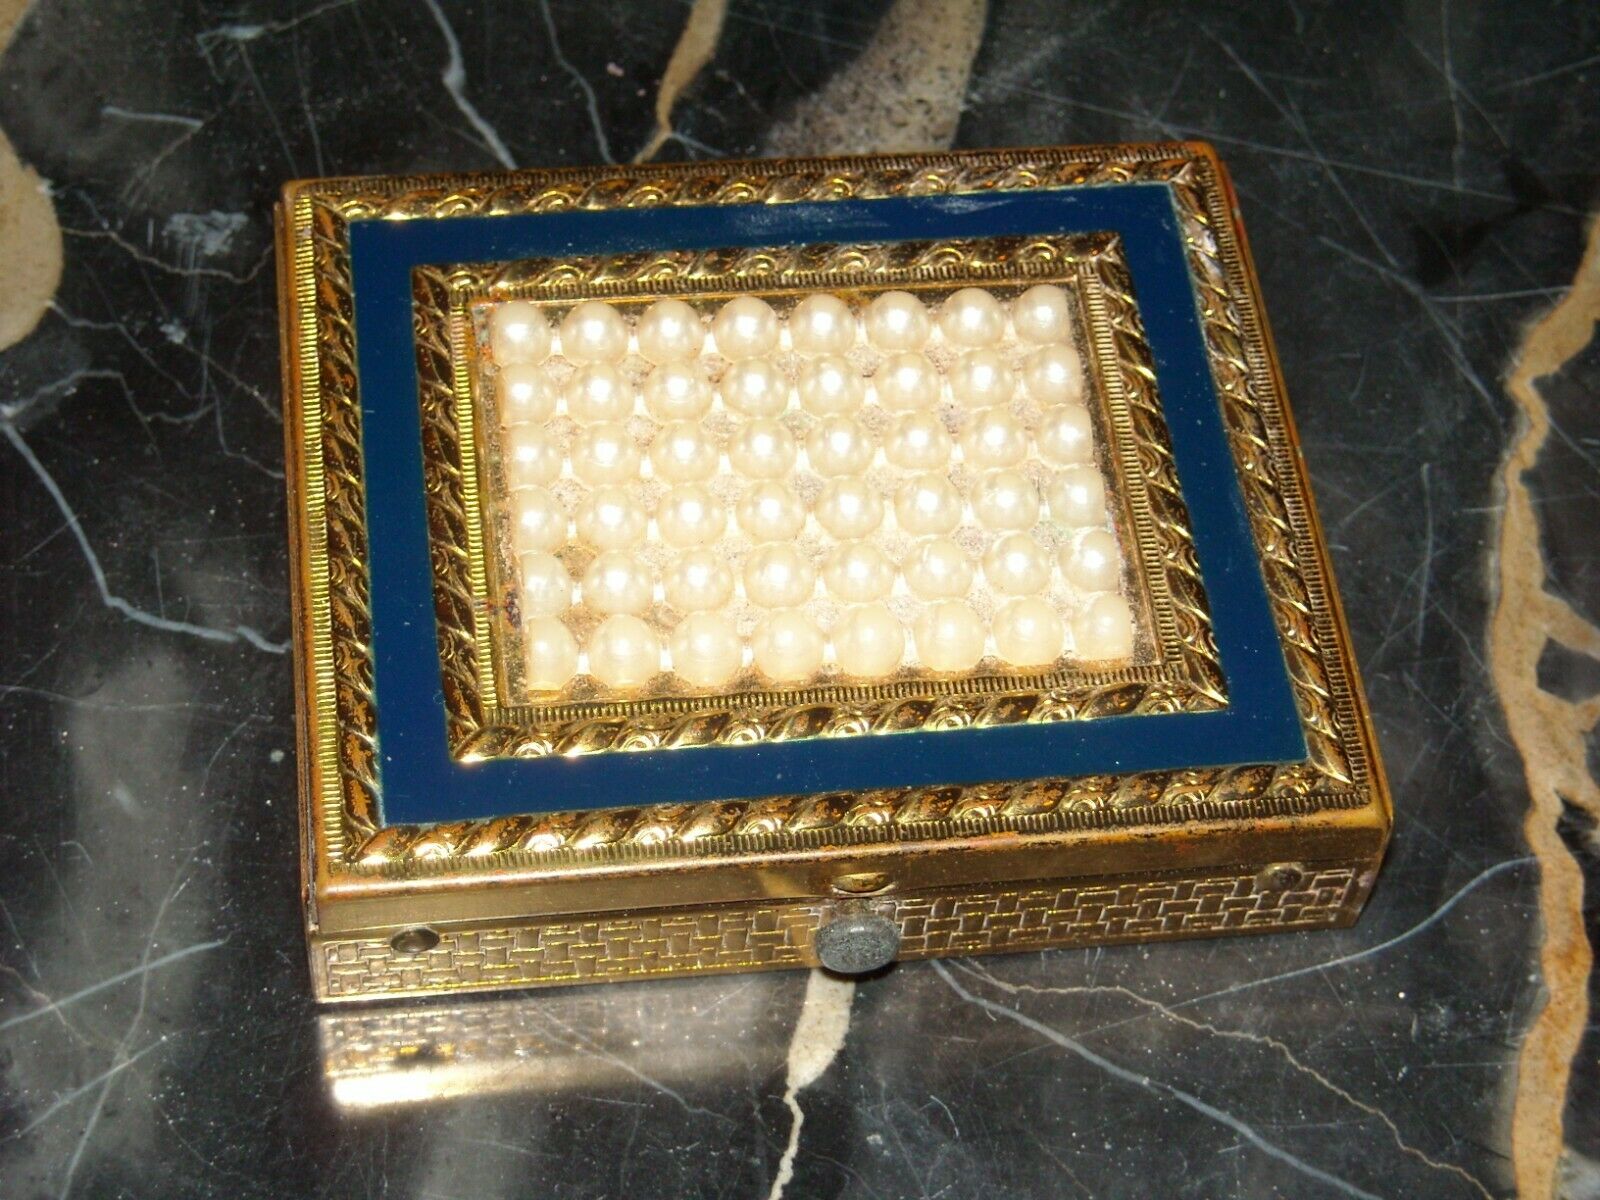 Box Compact W/ Enamel And Faux Pearls - Rope Twist Border And Basket Weave Case